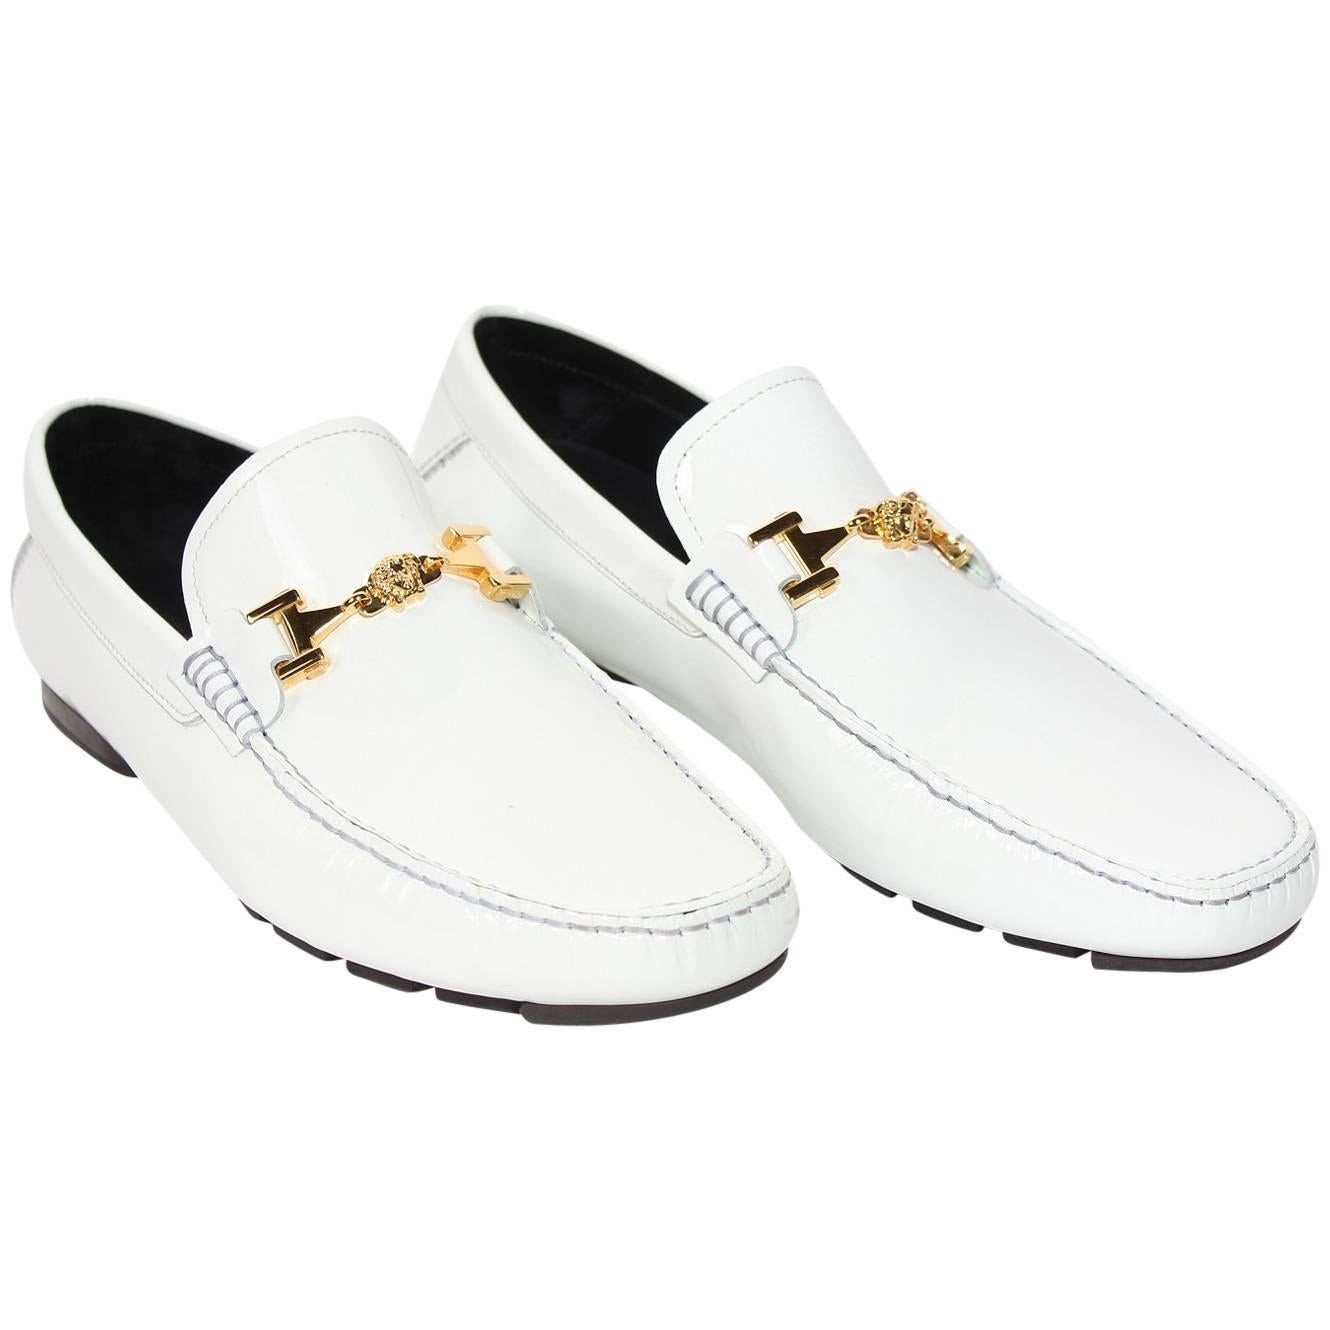  Versace White Patent Leather Loafers Shoes as seen on Bruno